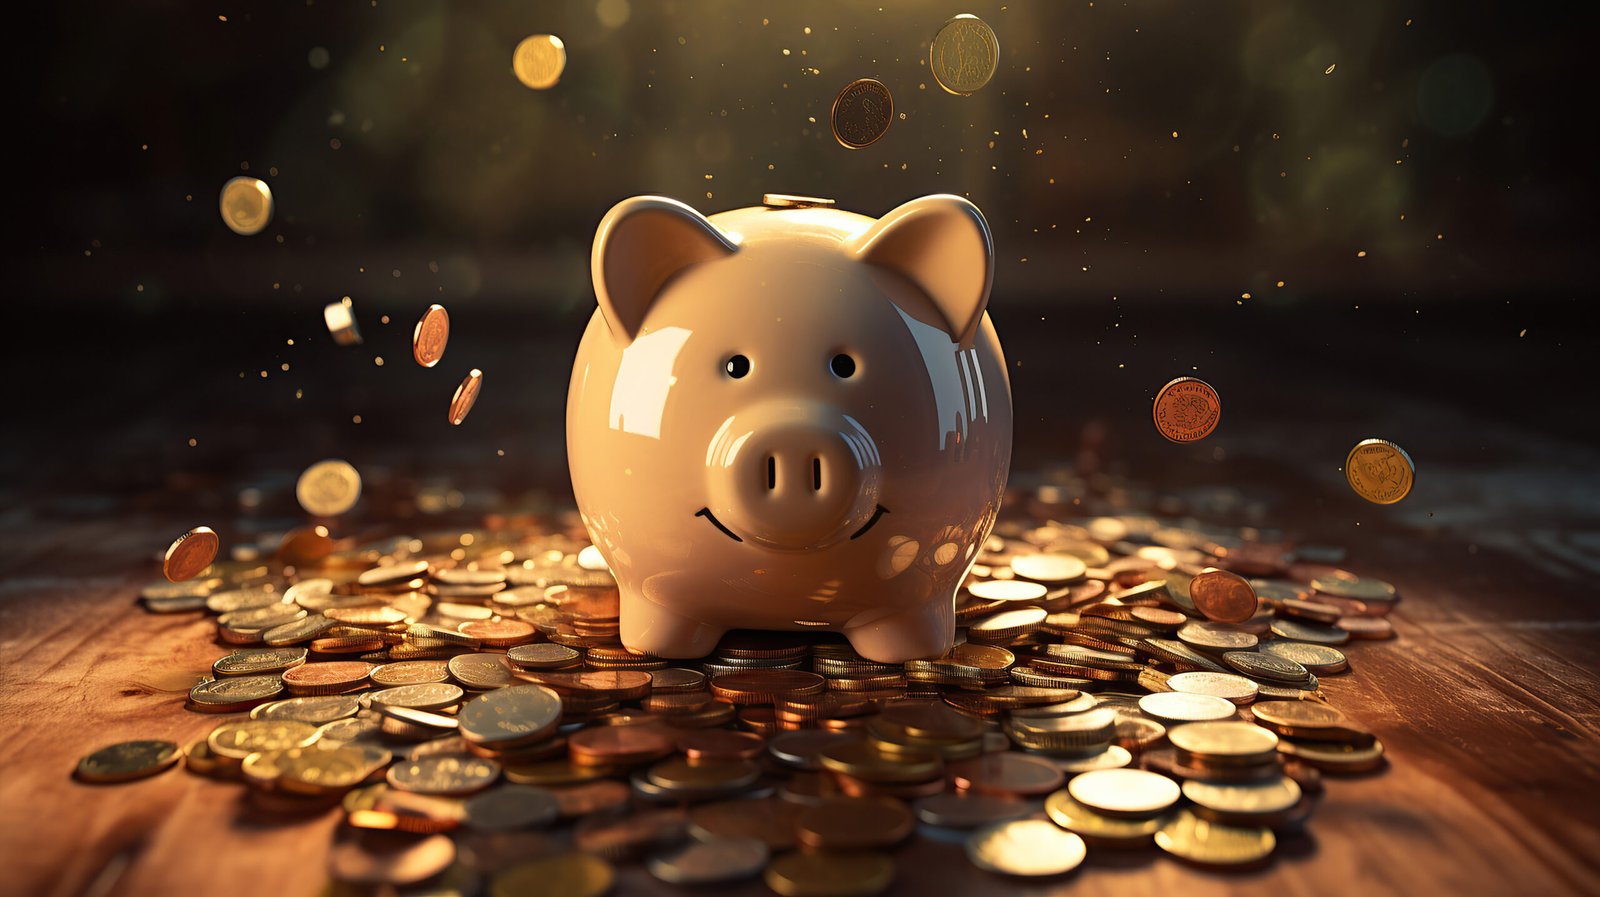 The piggy bank's overflow of coins illustrates savings and financial learning.